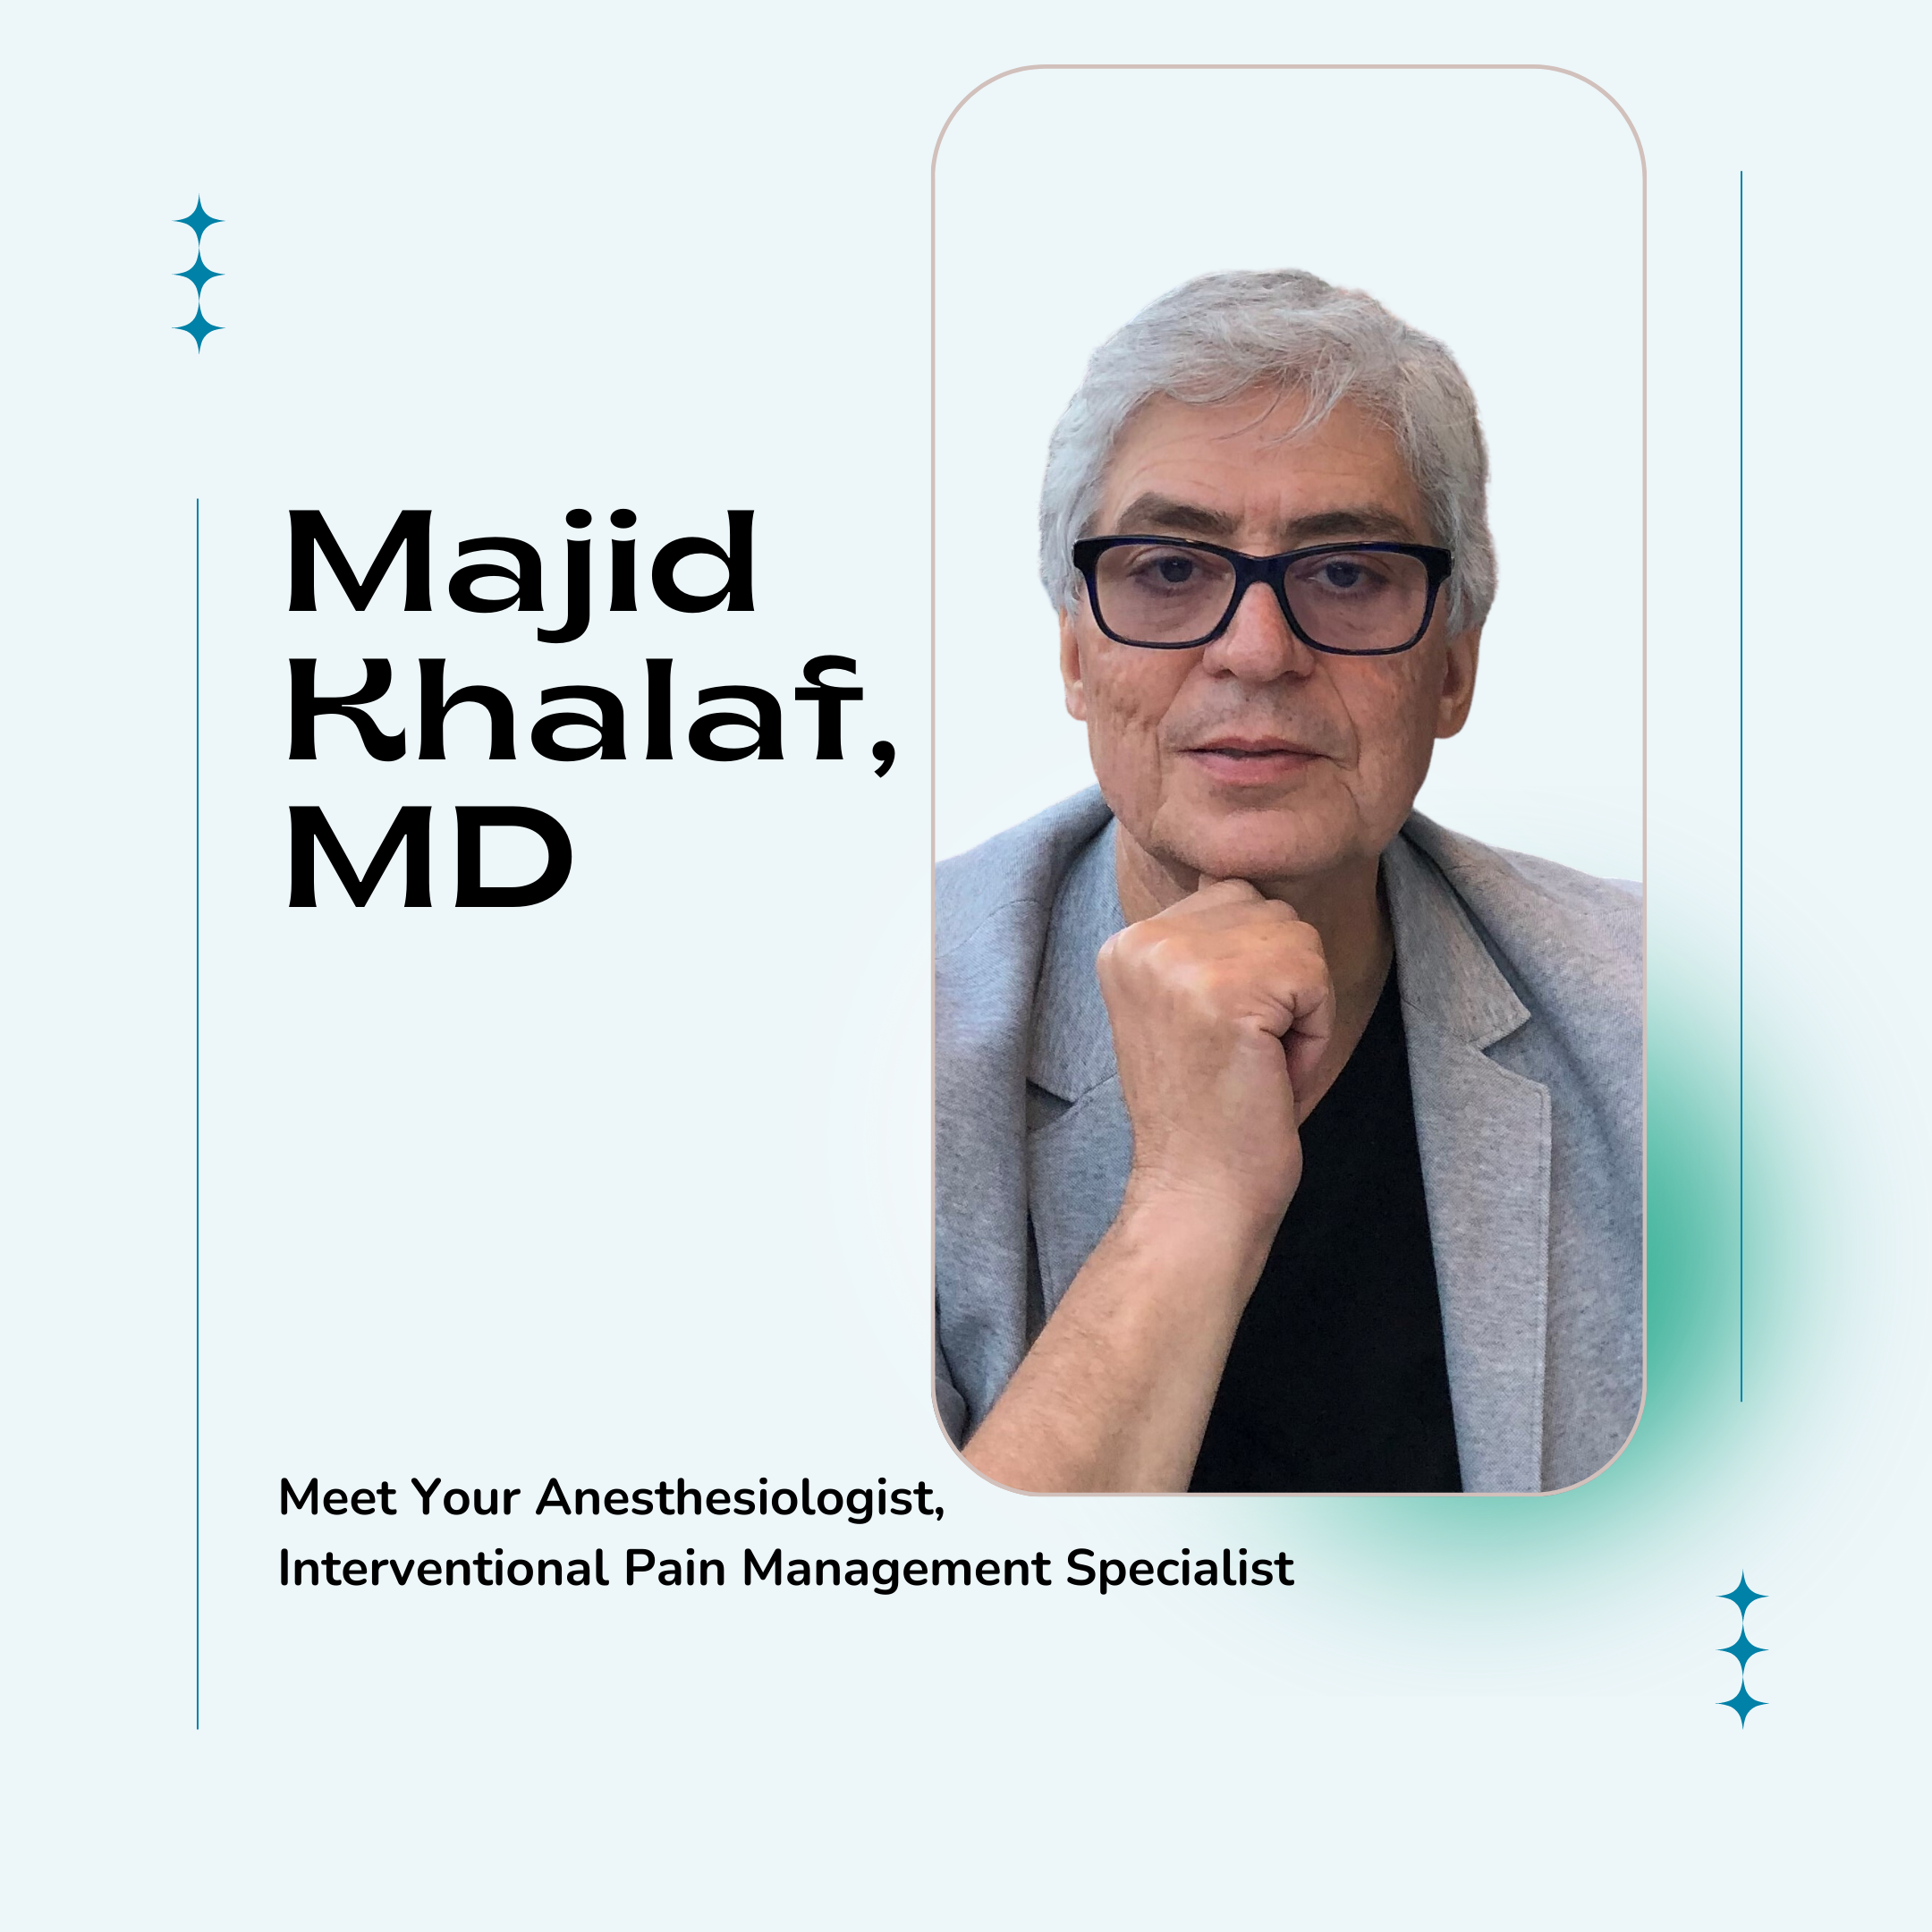 I’m Majid Khalaf, MD, an experienced Anesthesiologist and Interventional Pain Management Specialist with a passion for helping individuals achieve optimal health and well-being. With expertise in various areas, including Botox and Fillers, IV vitamin infusion therapy, Ketamine infusion for pain and depression management, spine and joint injections, as well as PRP injections, I am committed to providing comprehensive care tailored to your unique needs.